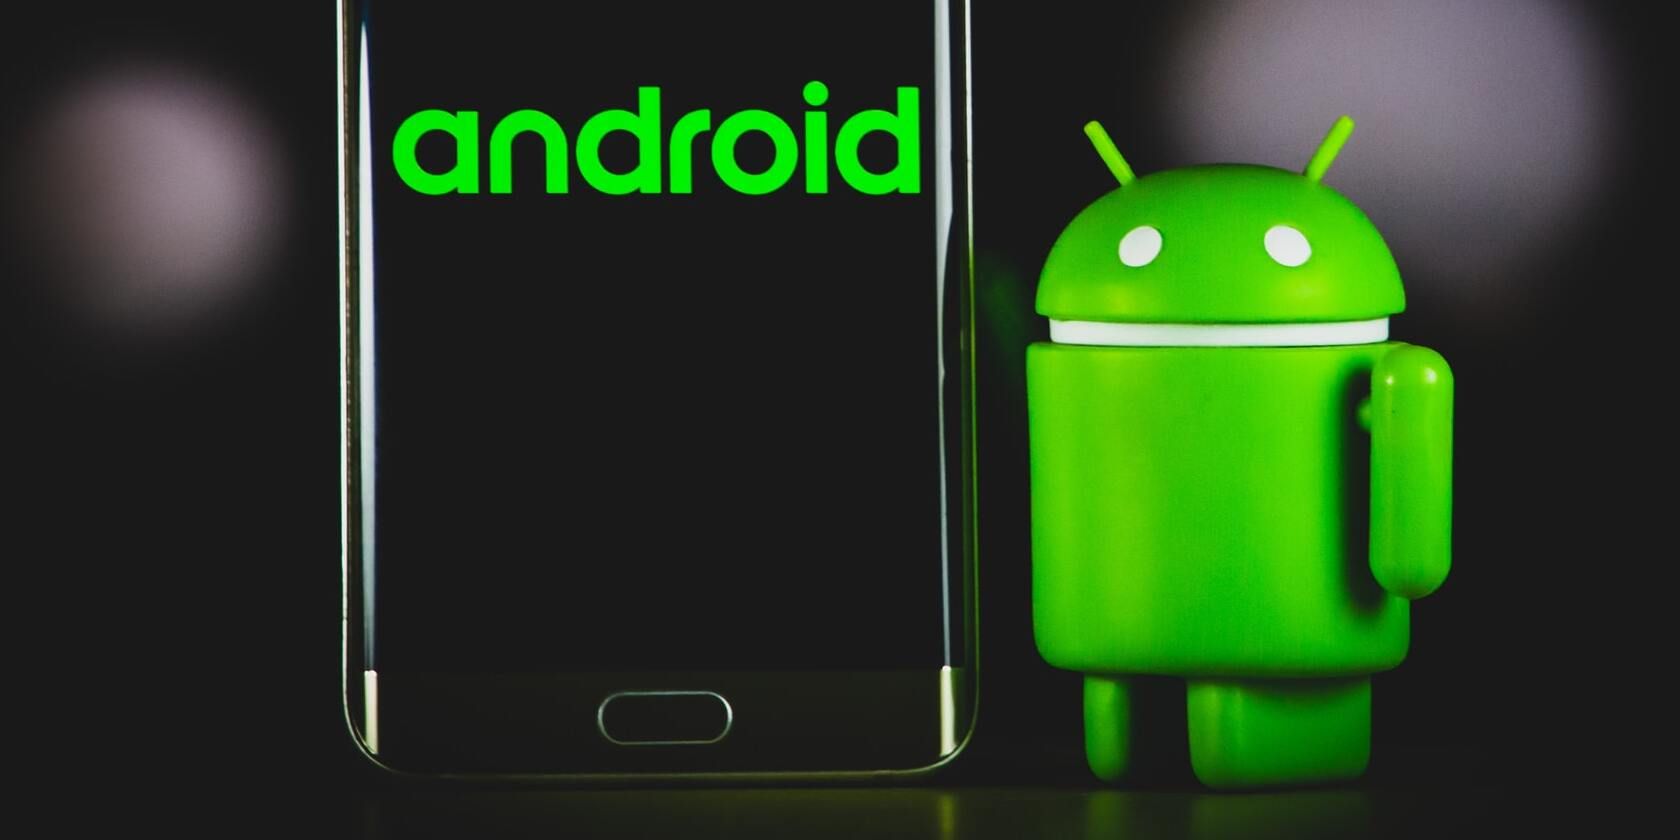 Image showing an Android phone with the Android mascot